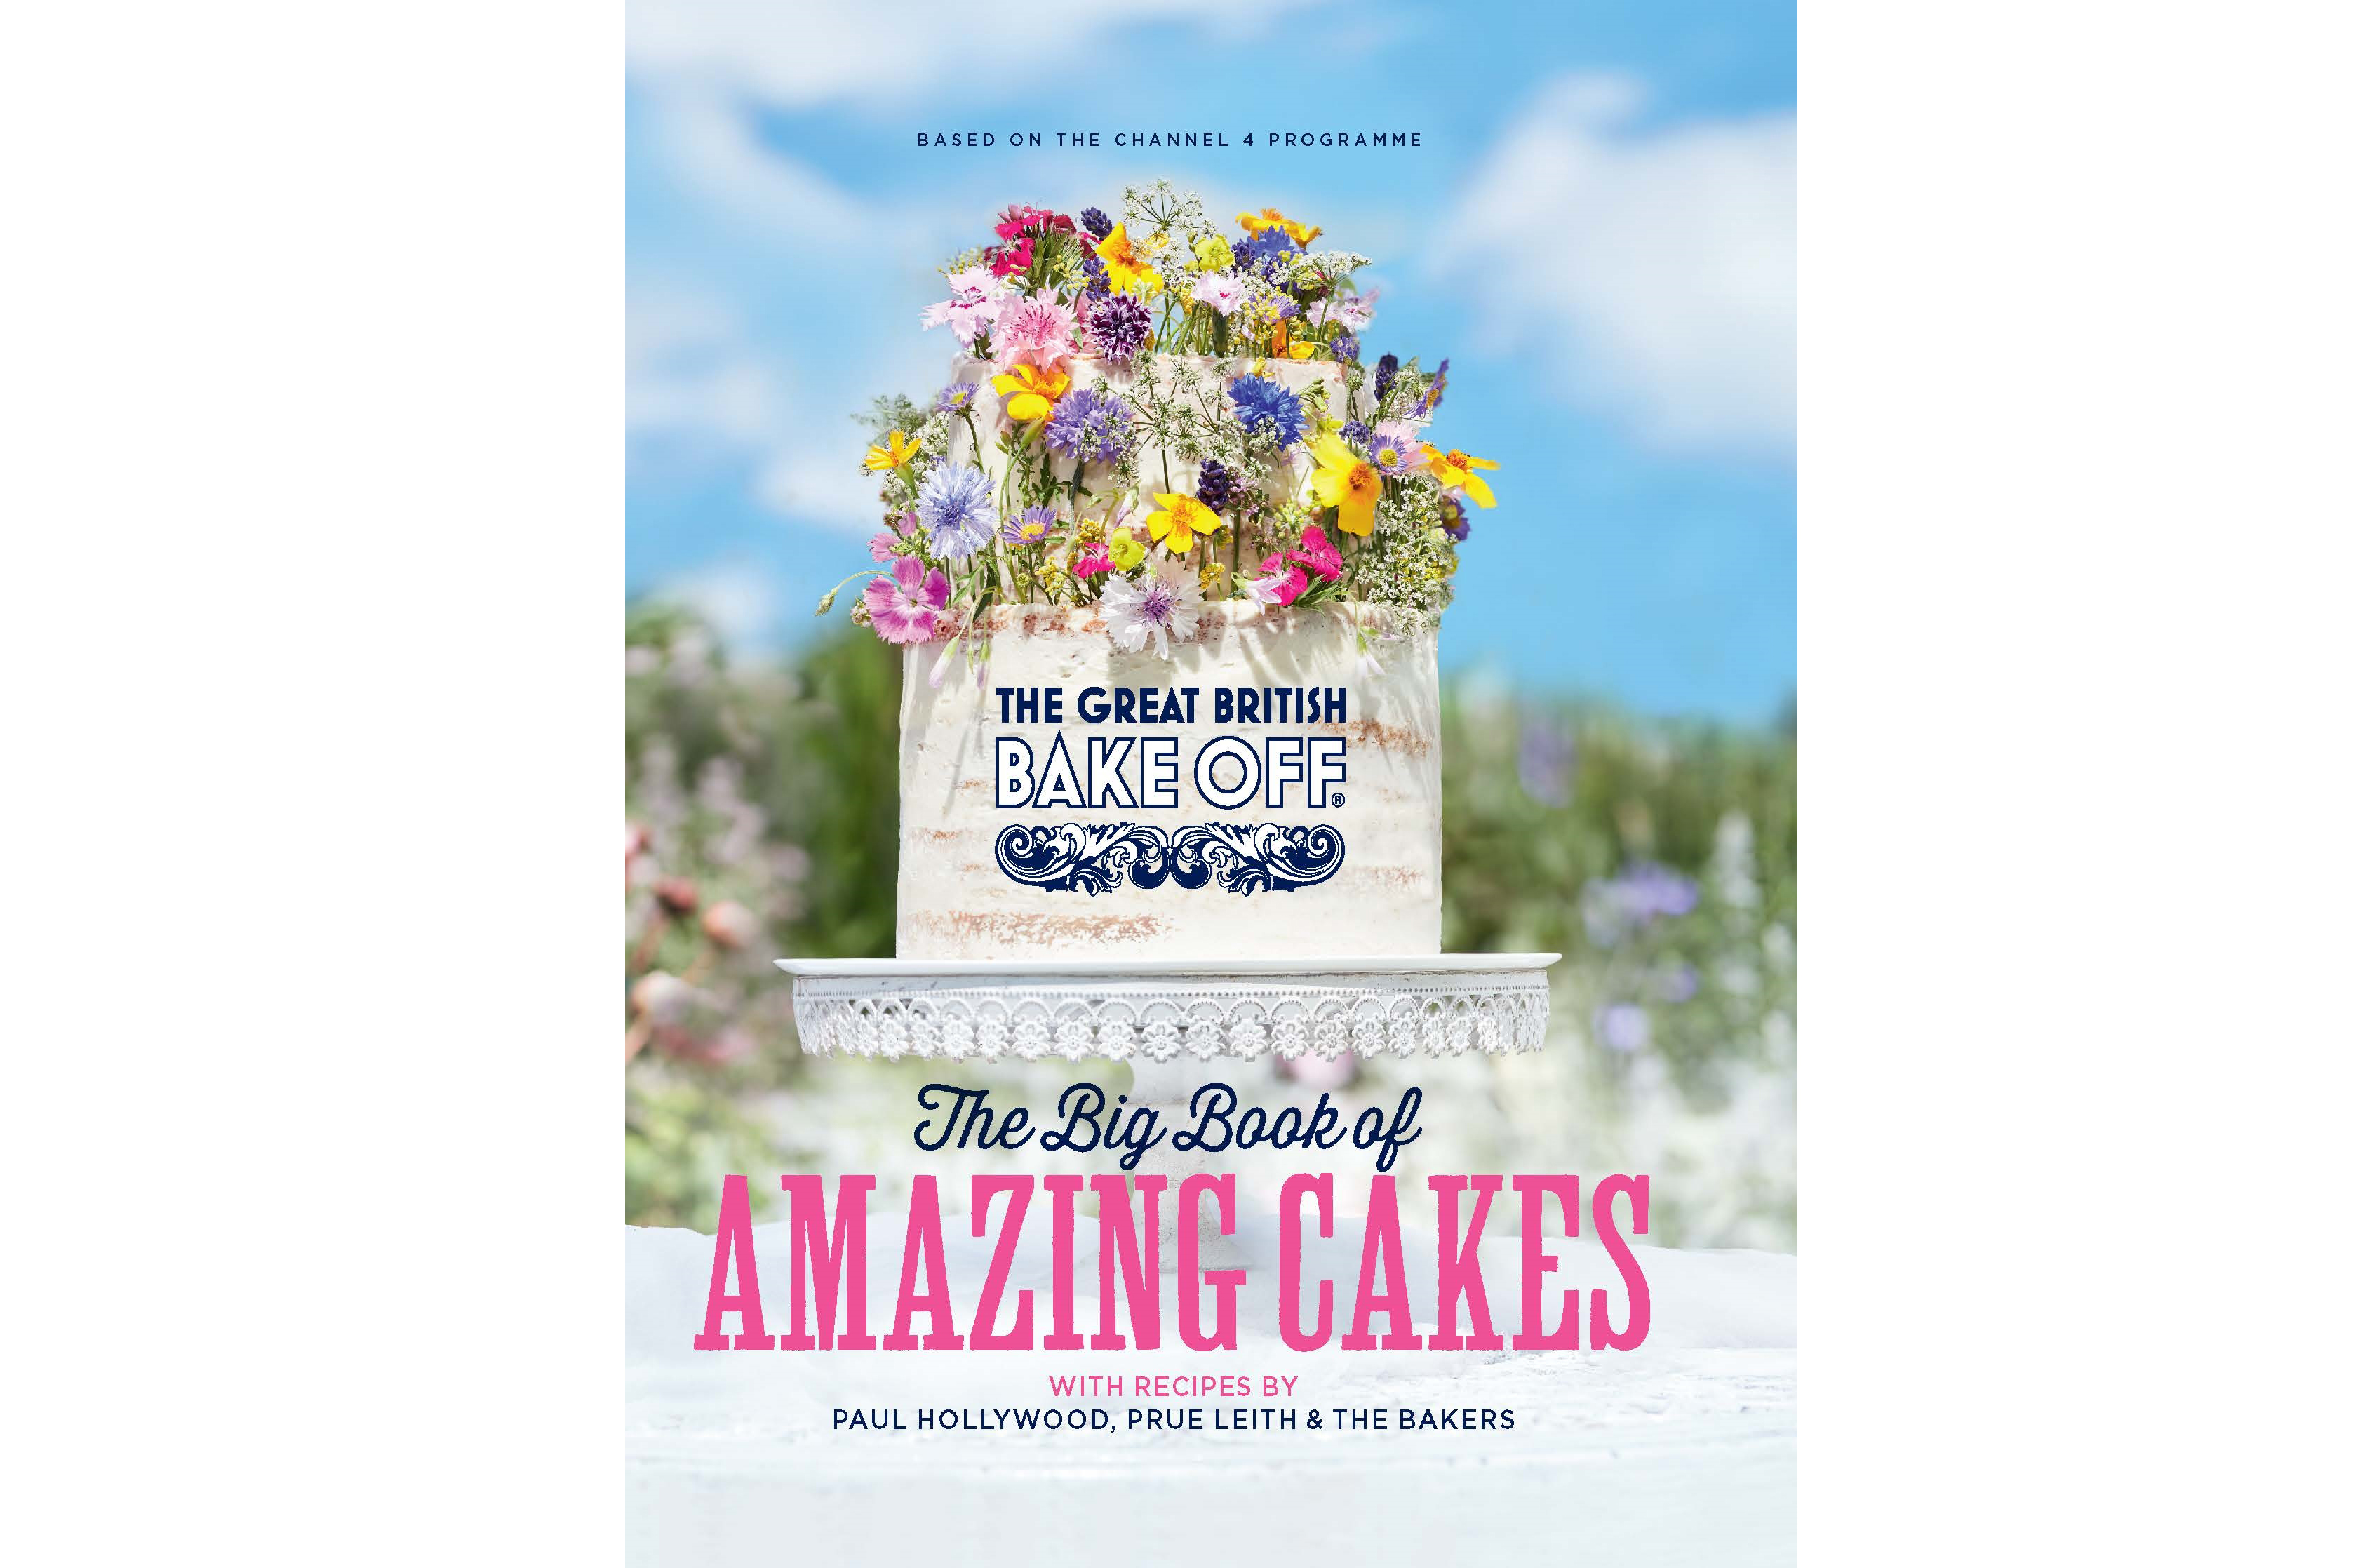 The Great British Bake Off: The Big Book of Amazing Cakes (Sphere/PA)